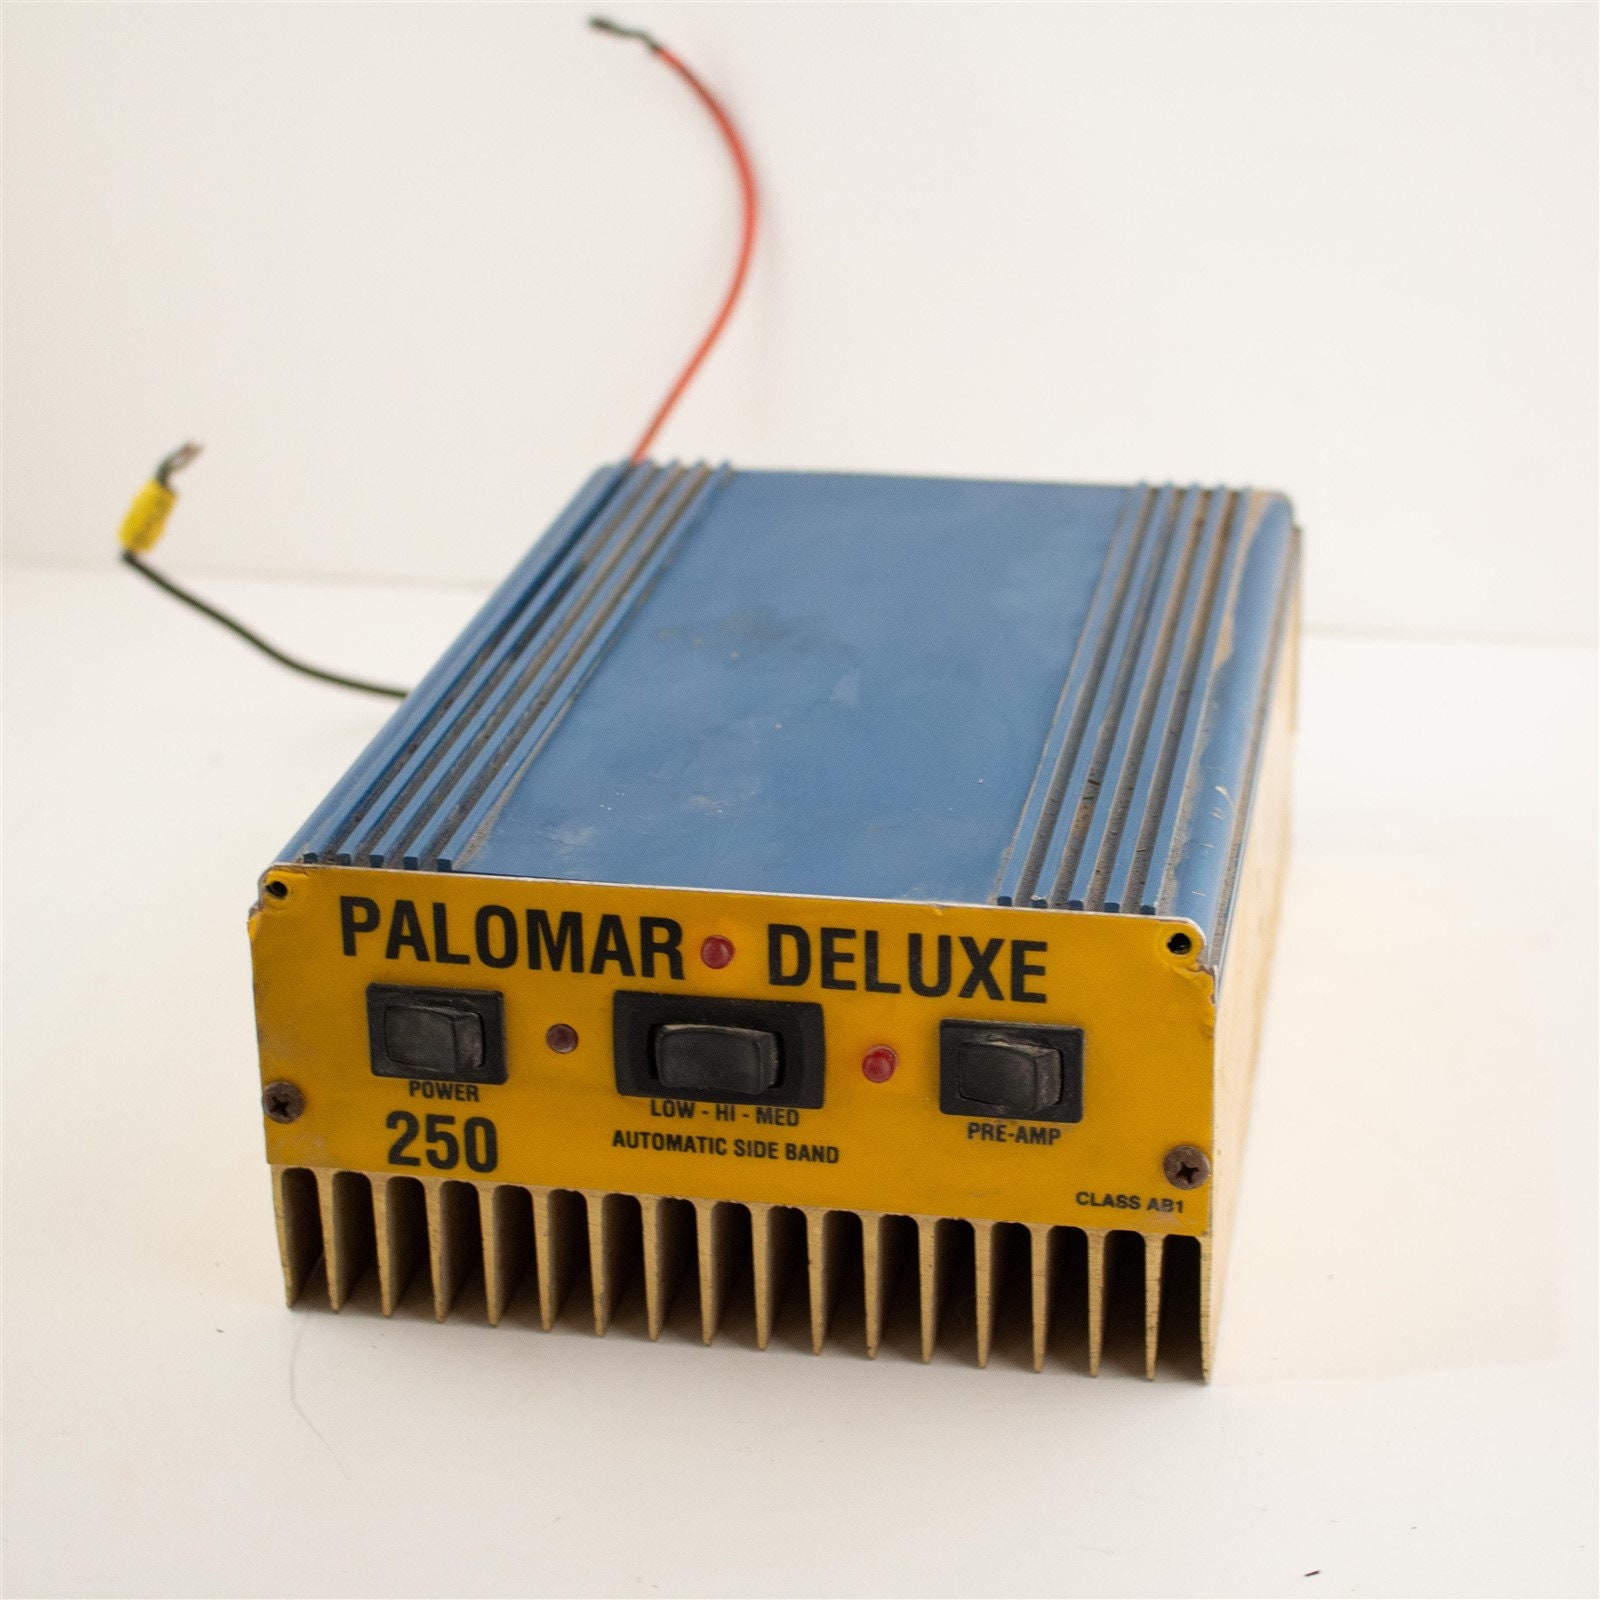 Palomar Deluxe 250 Linear CB Amplifier powers Up hq photo